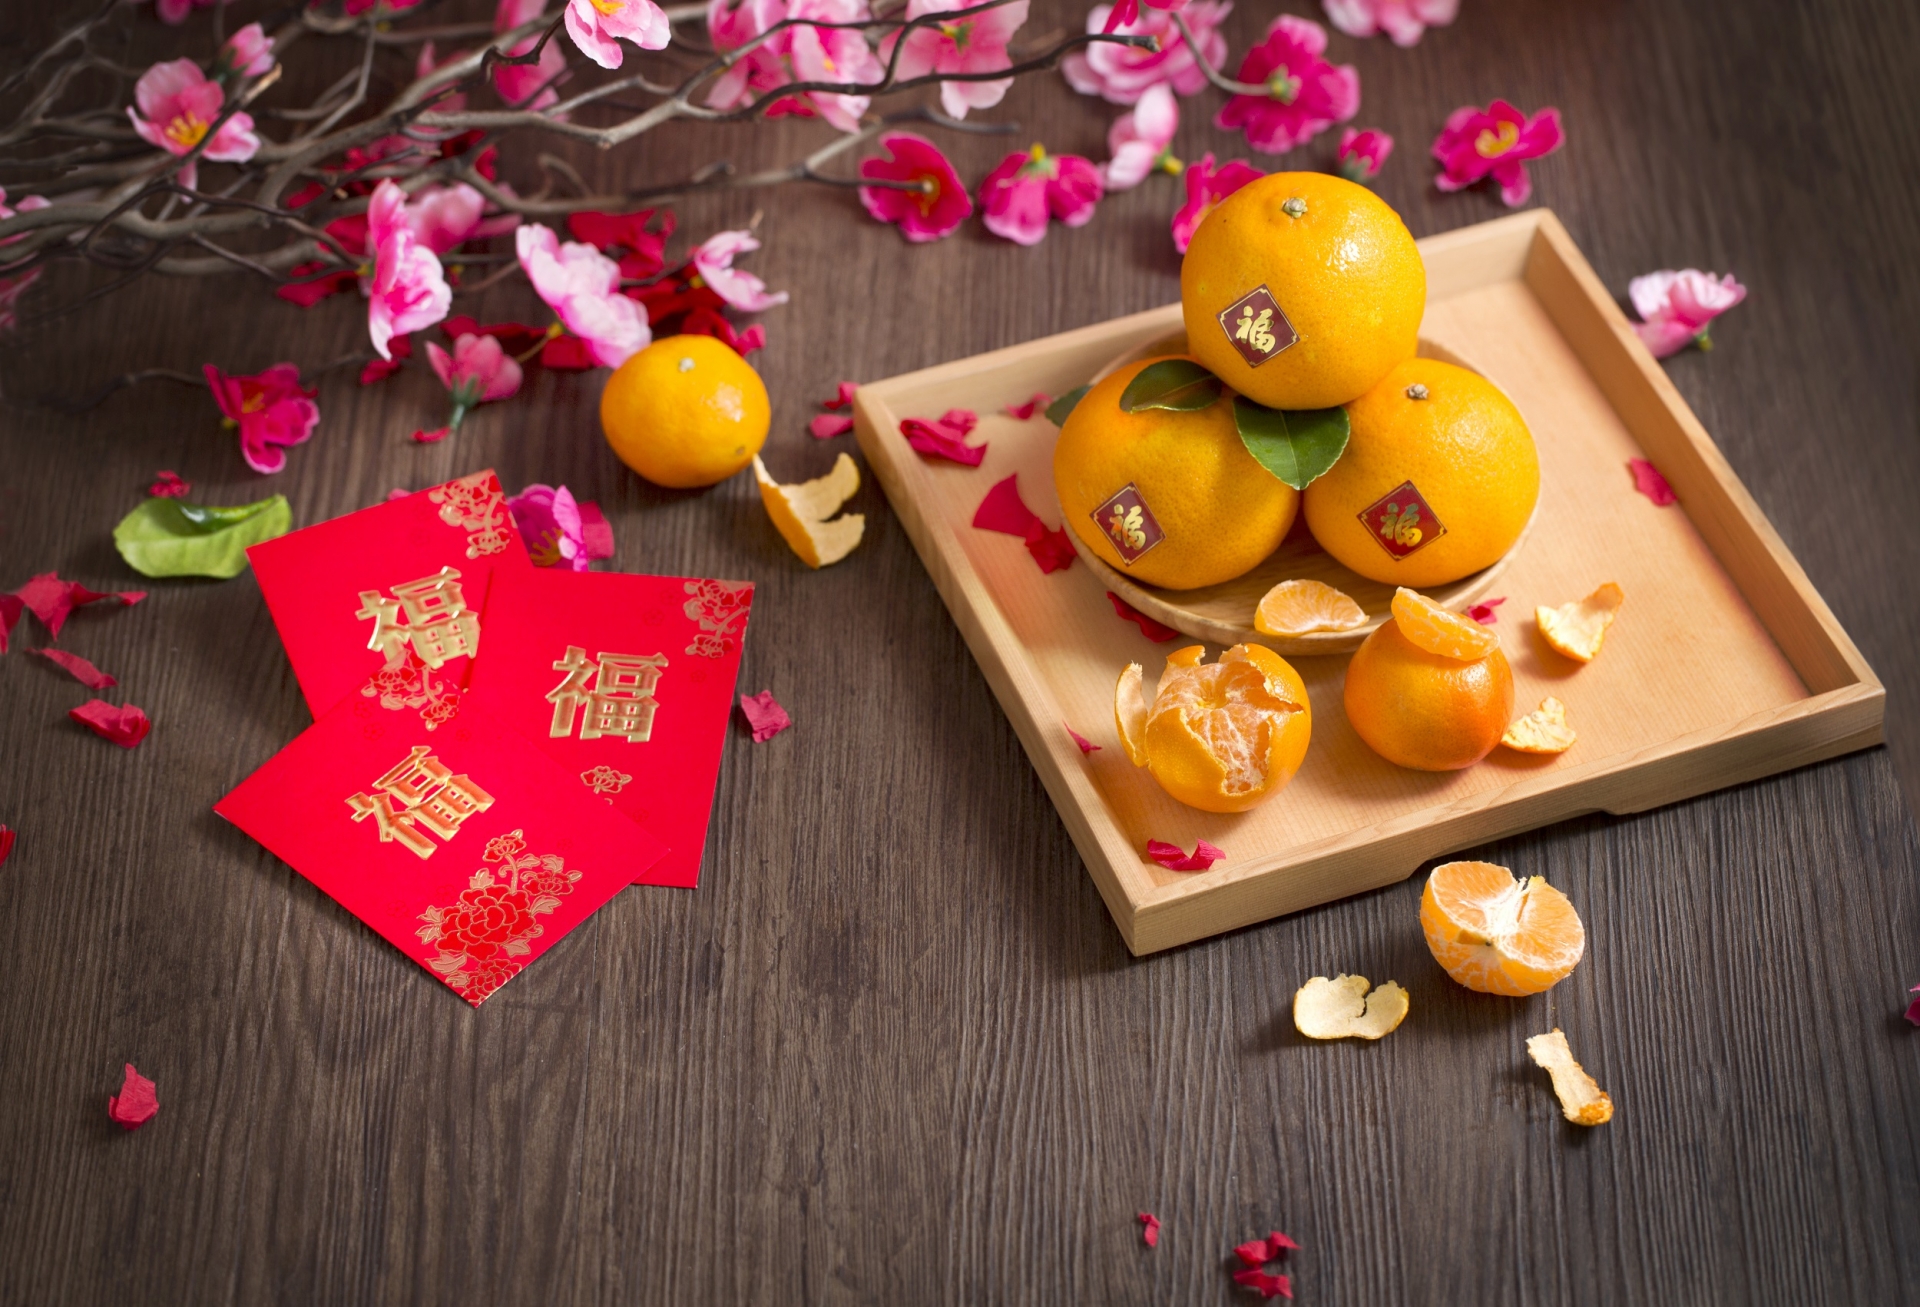 These Feng Shui Tips Would Help You Lure More Luck in the Year of OX